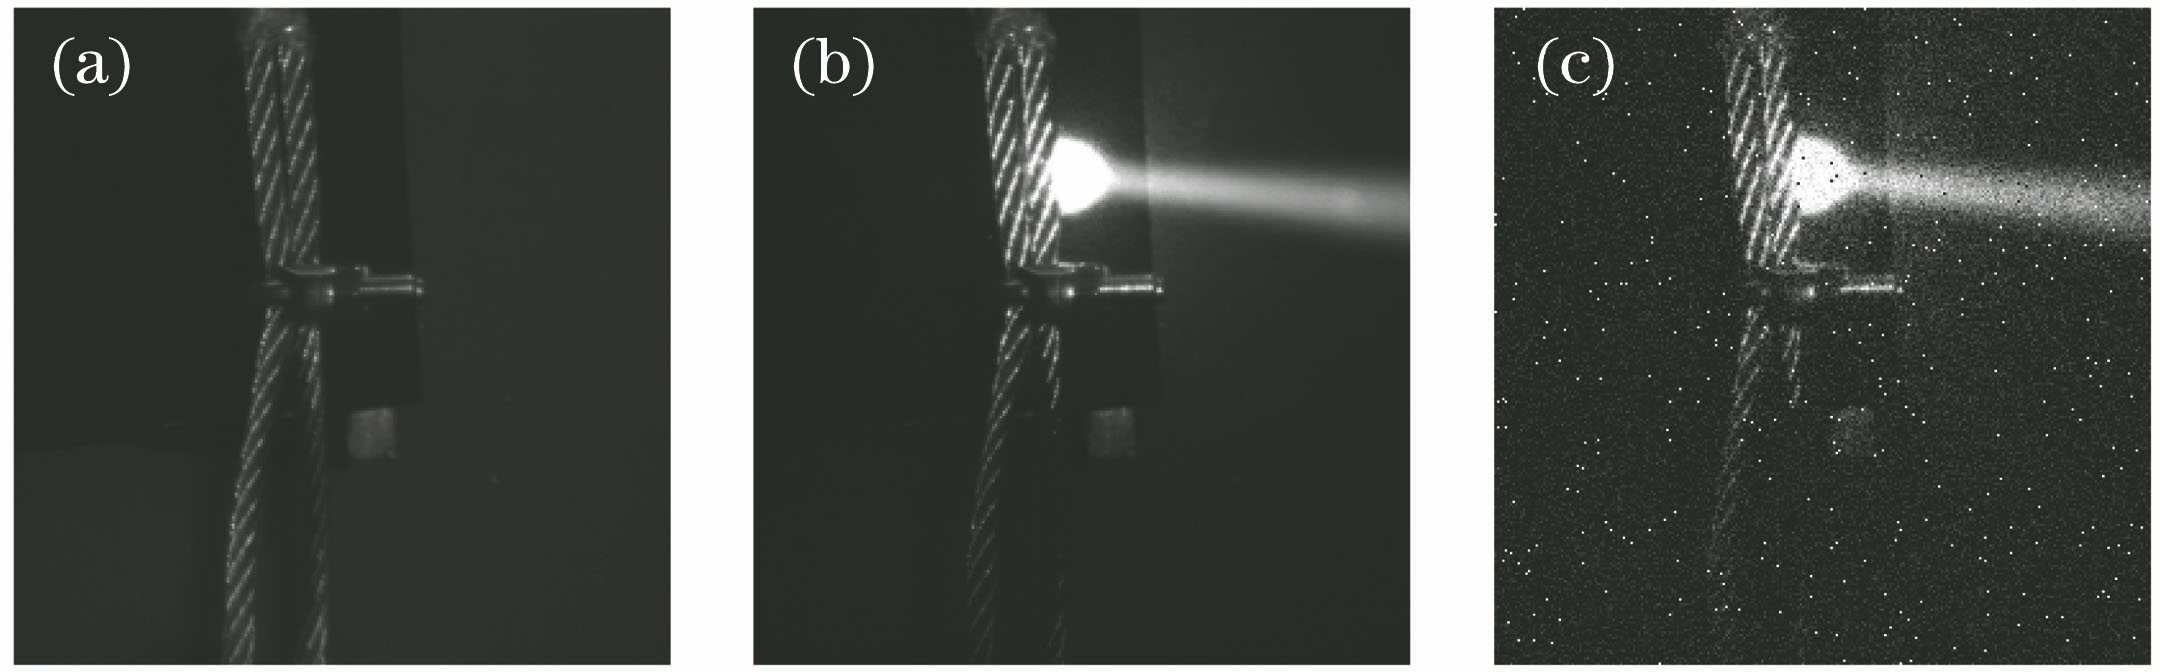 Schematic of training set. (a) Sample image; (b) image with backscattered light; (c) image with mixed noise